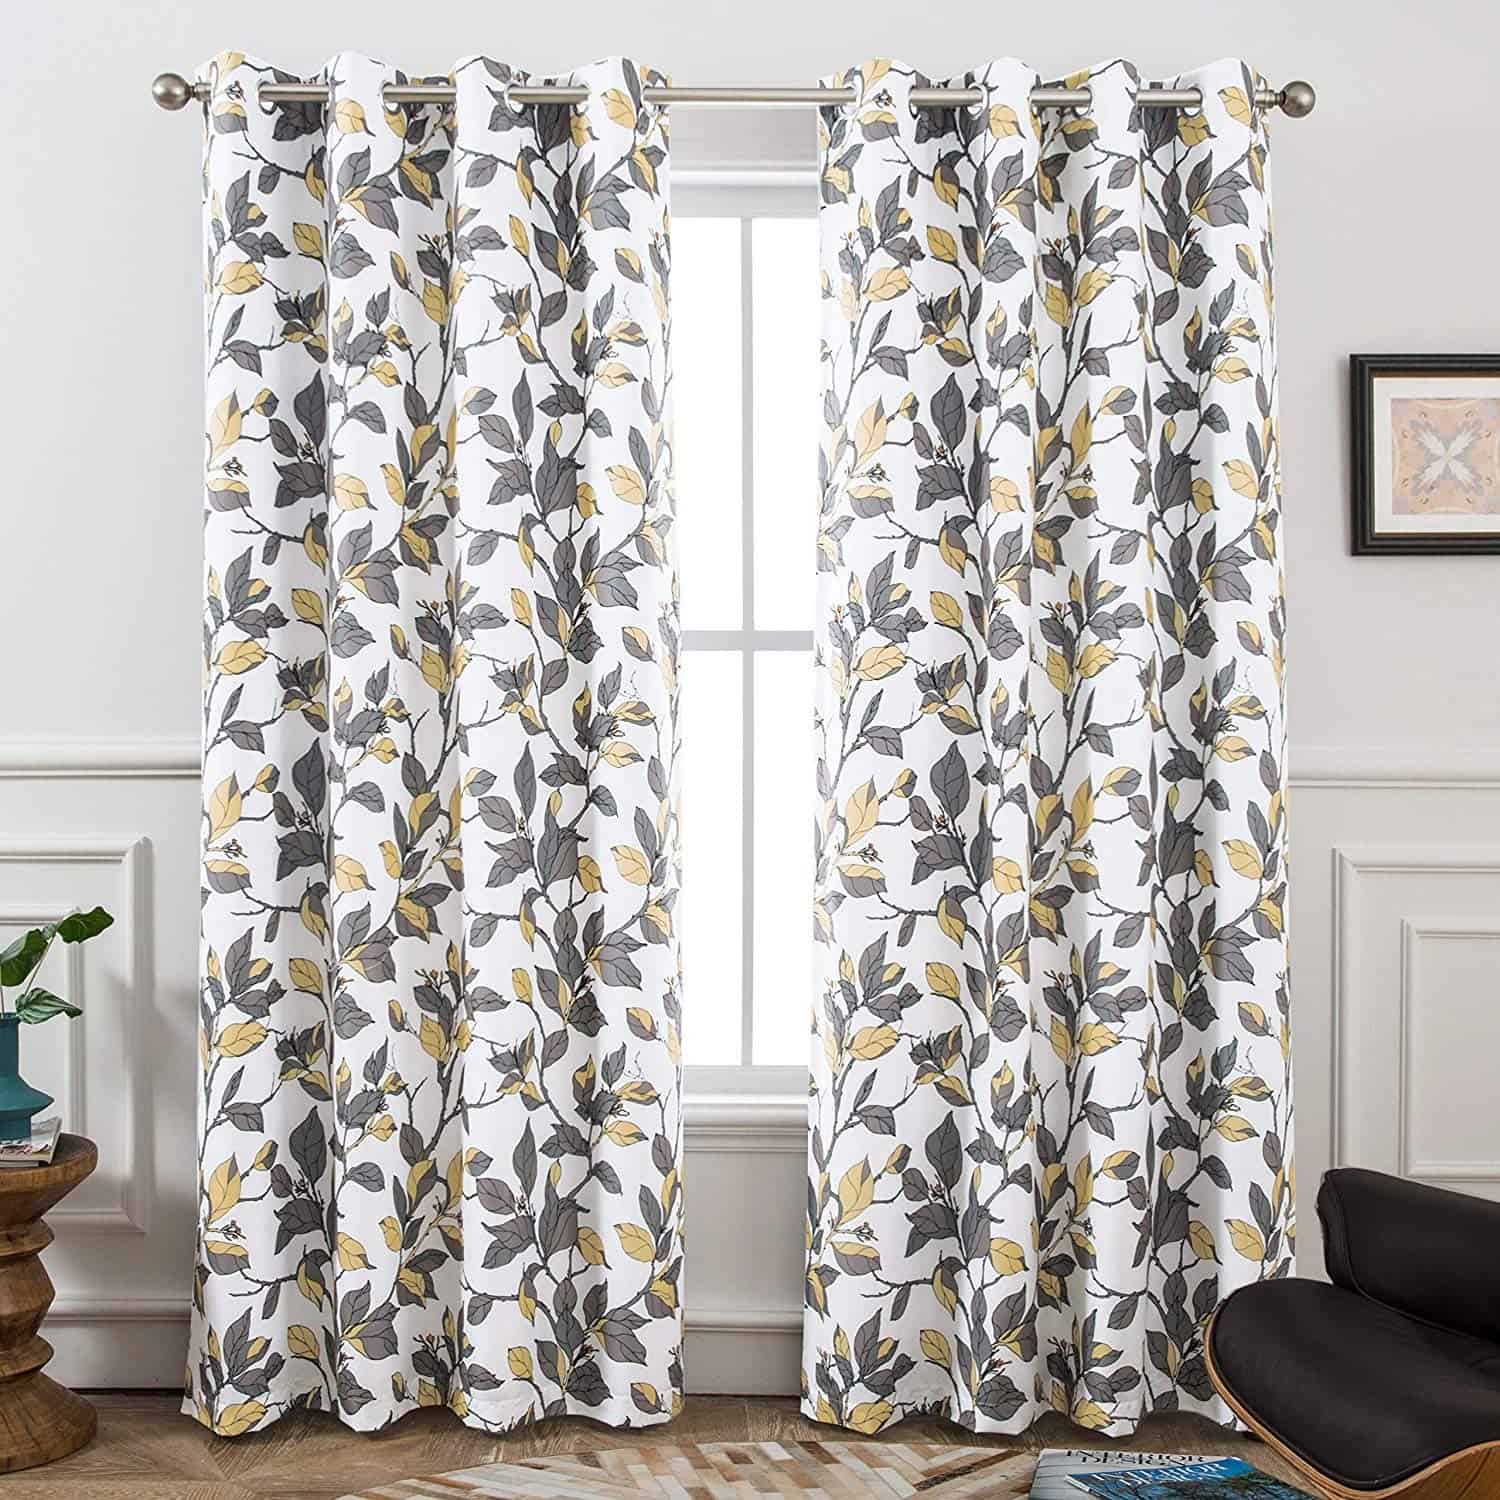 Botanical Curtains Are Great For Farmhouse Lovers